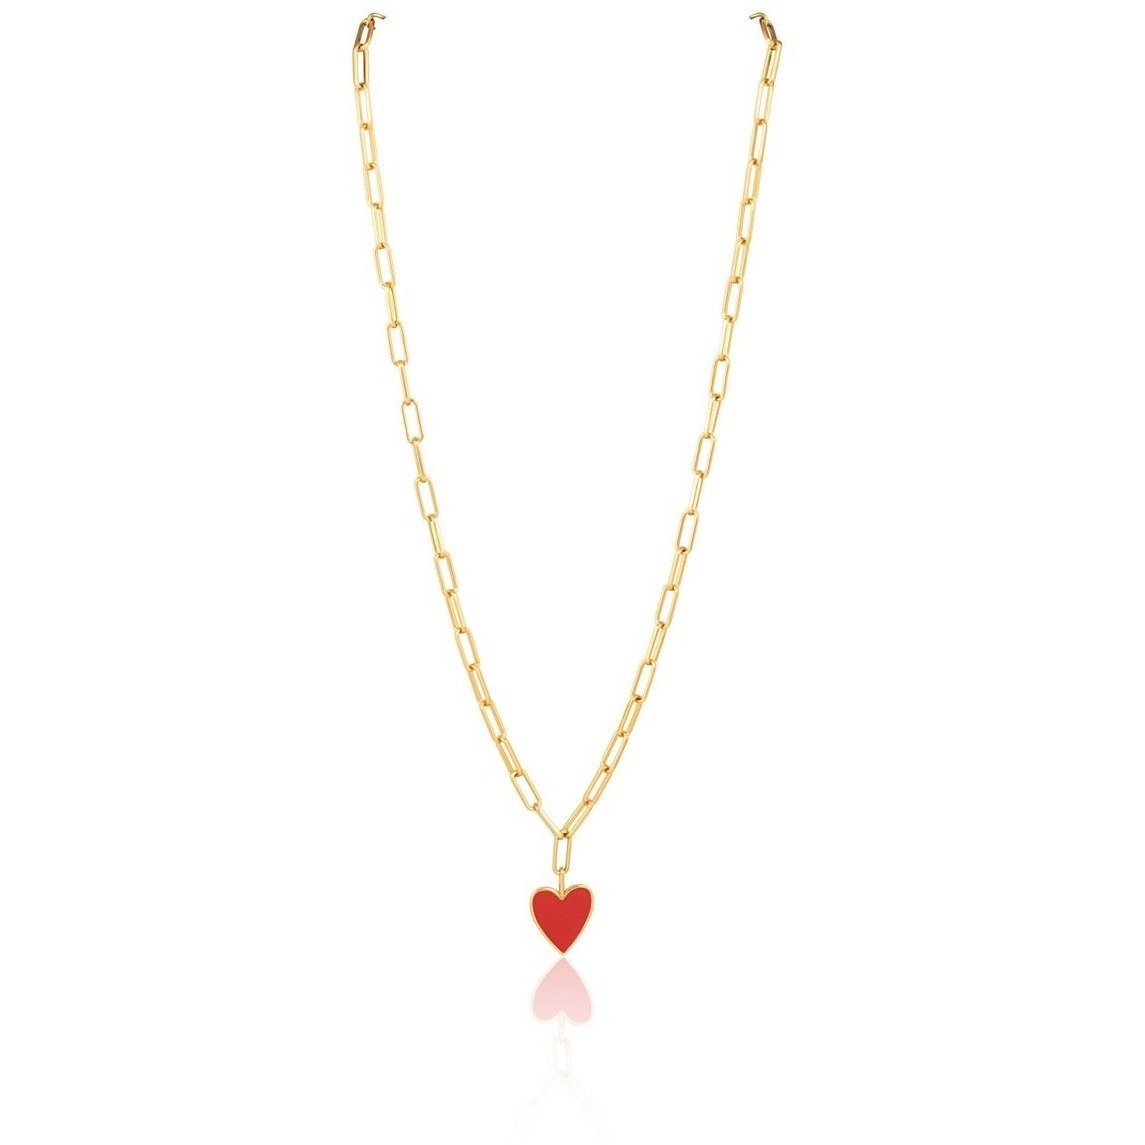 Edwardian 9ct Gold & Strawberry Red & White Enamel Heart Necklace (456M) |  The Antique Jewellery Company